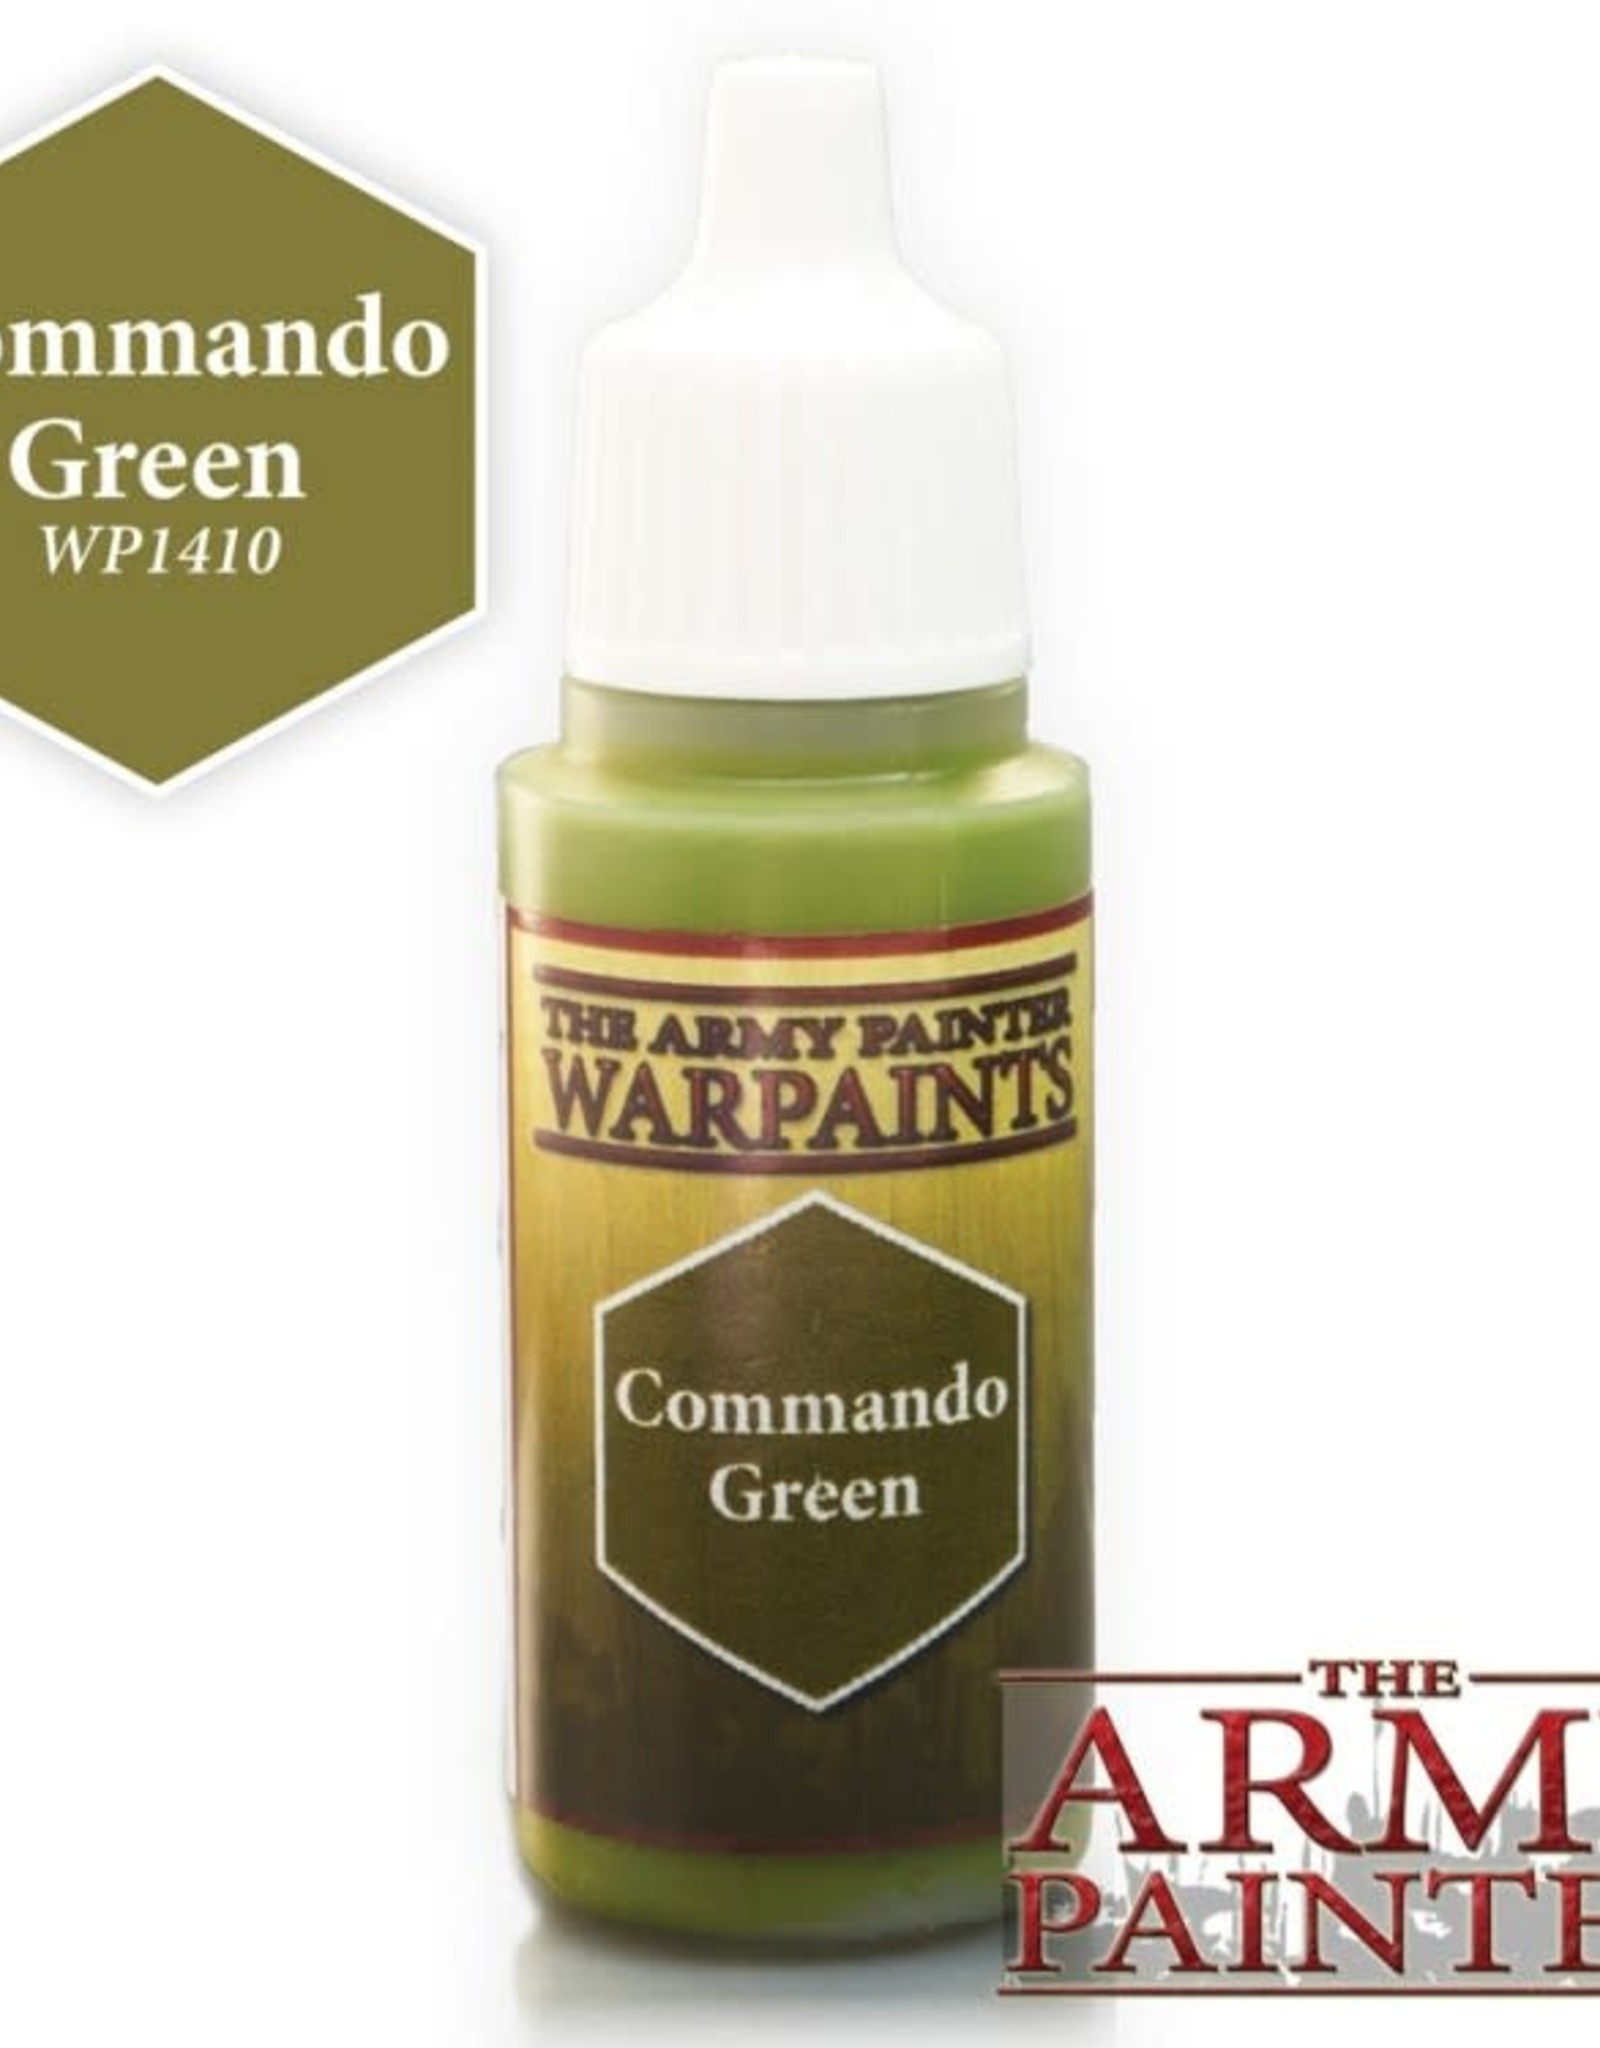 The Army Painter Warpaints - Commando Green